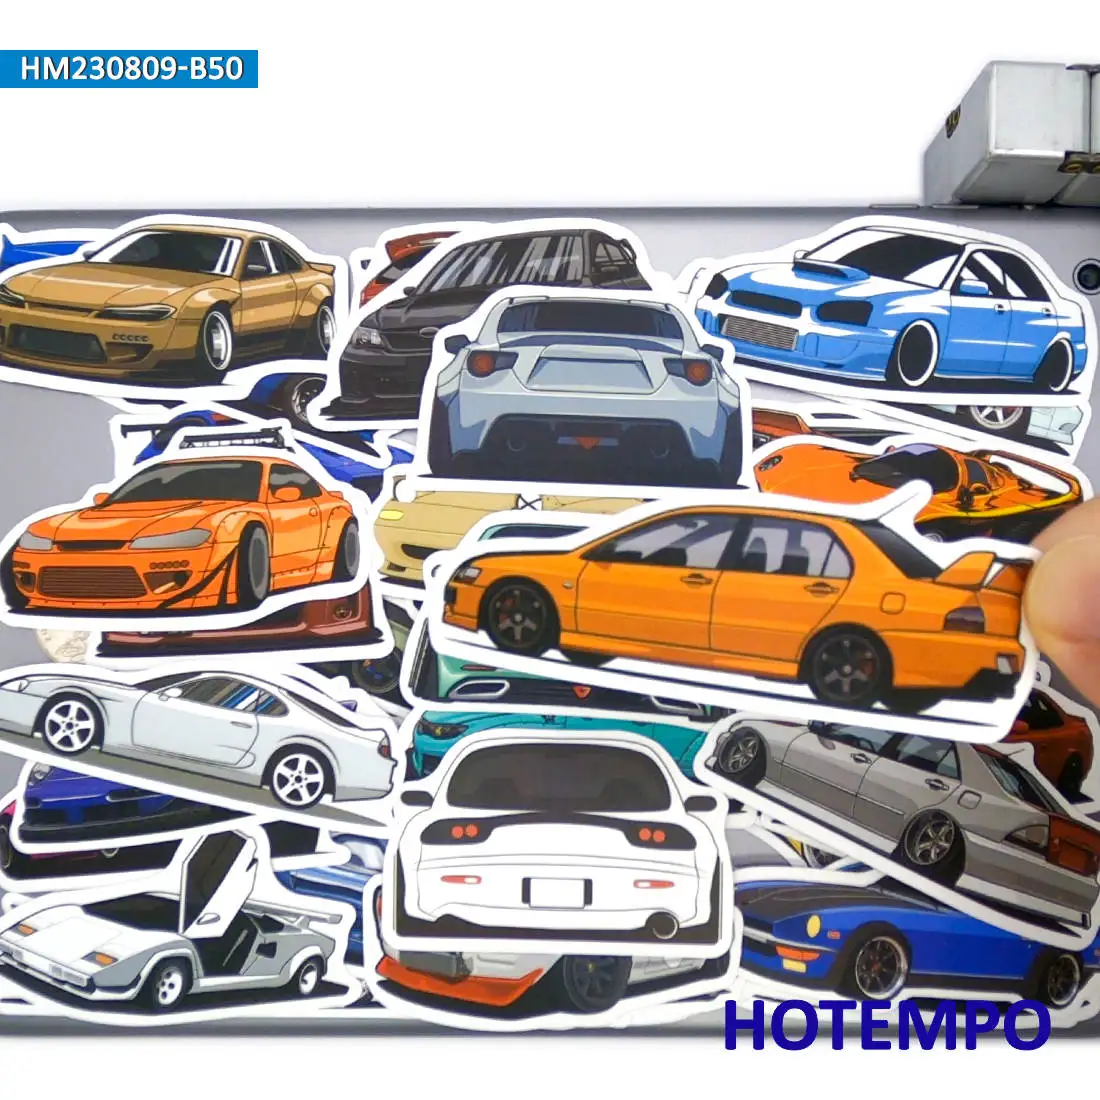 

20/30/50Pieces Mixed Car Supercar Vehicle Cartoon Style Stickers for Kids Scrapbook Luggage Bike Motorcycle Phone Laptop Sticker